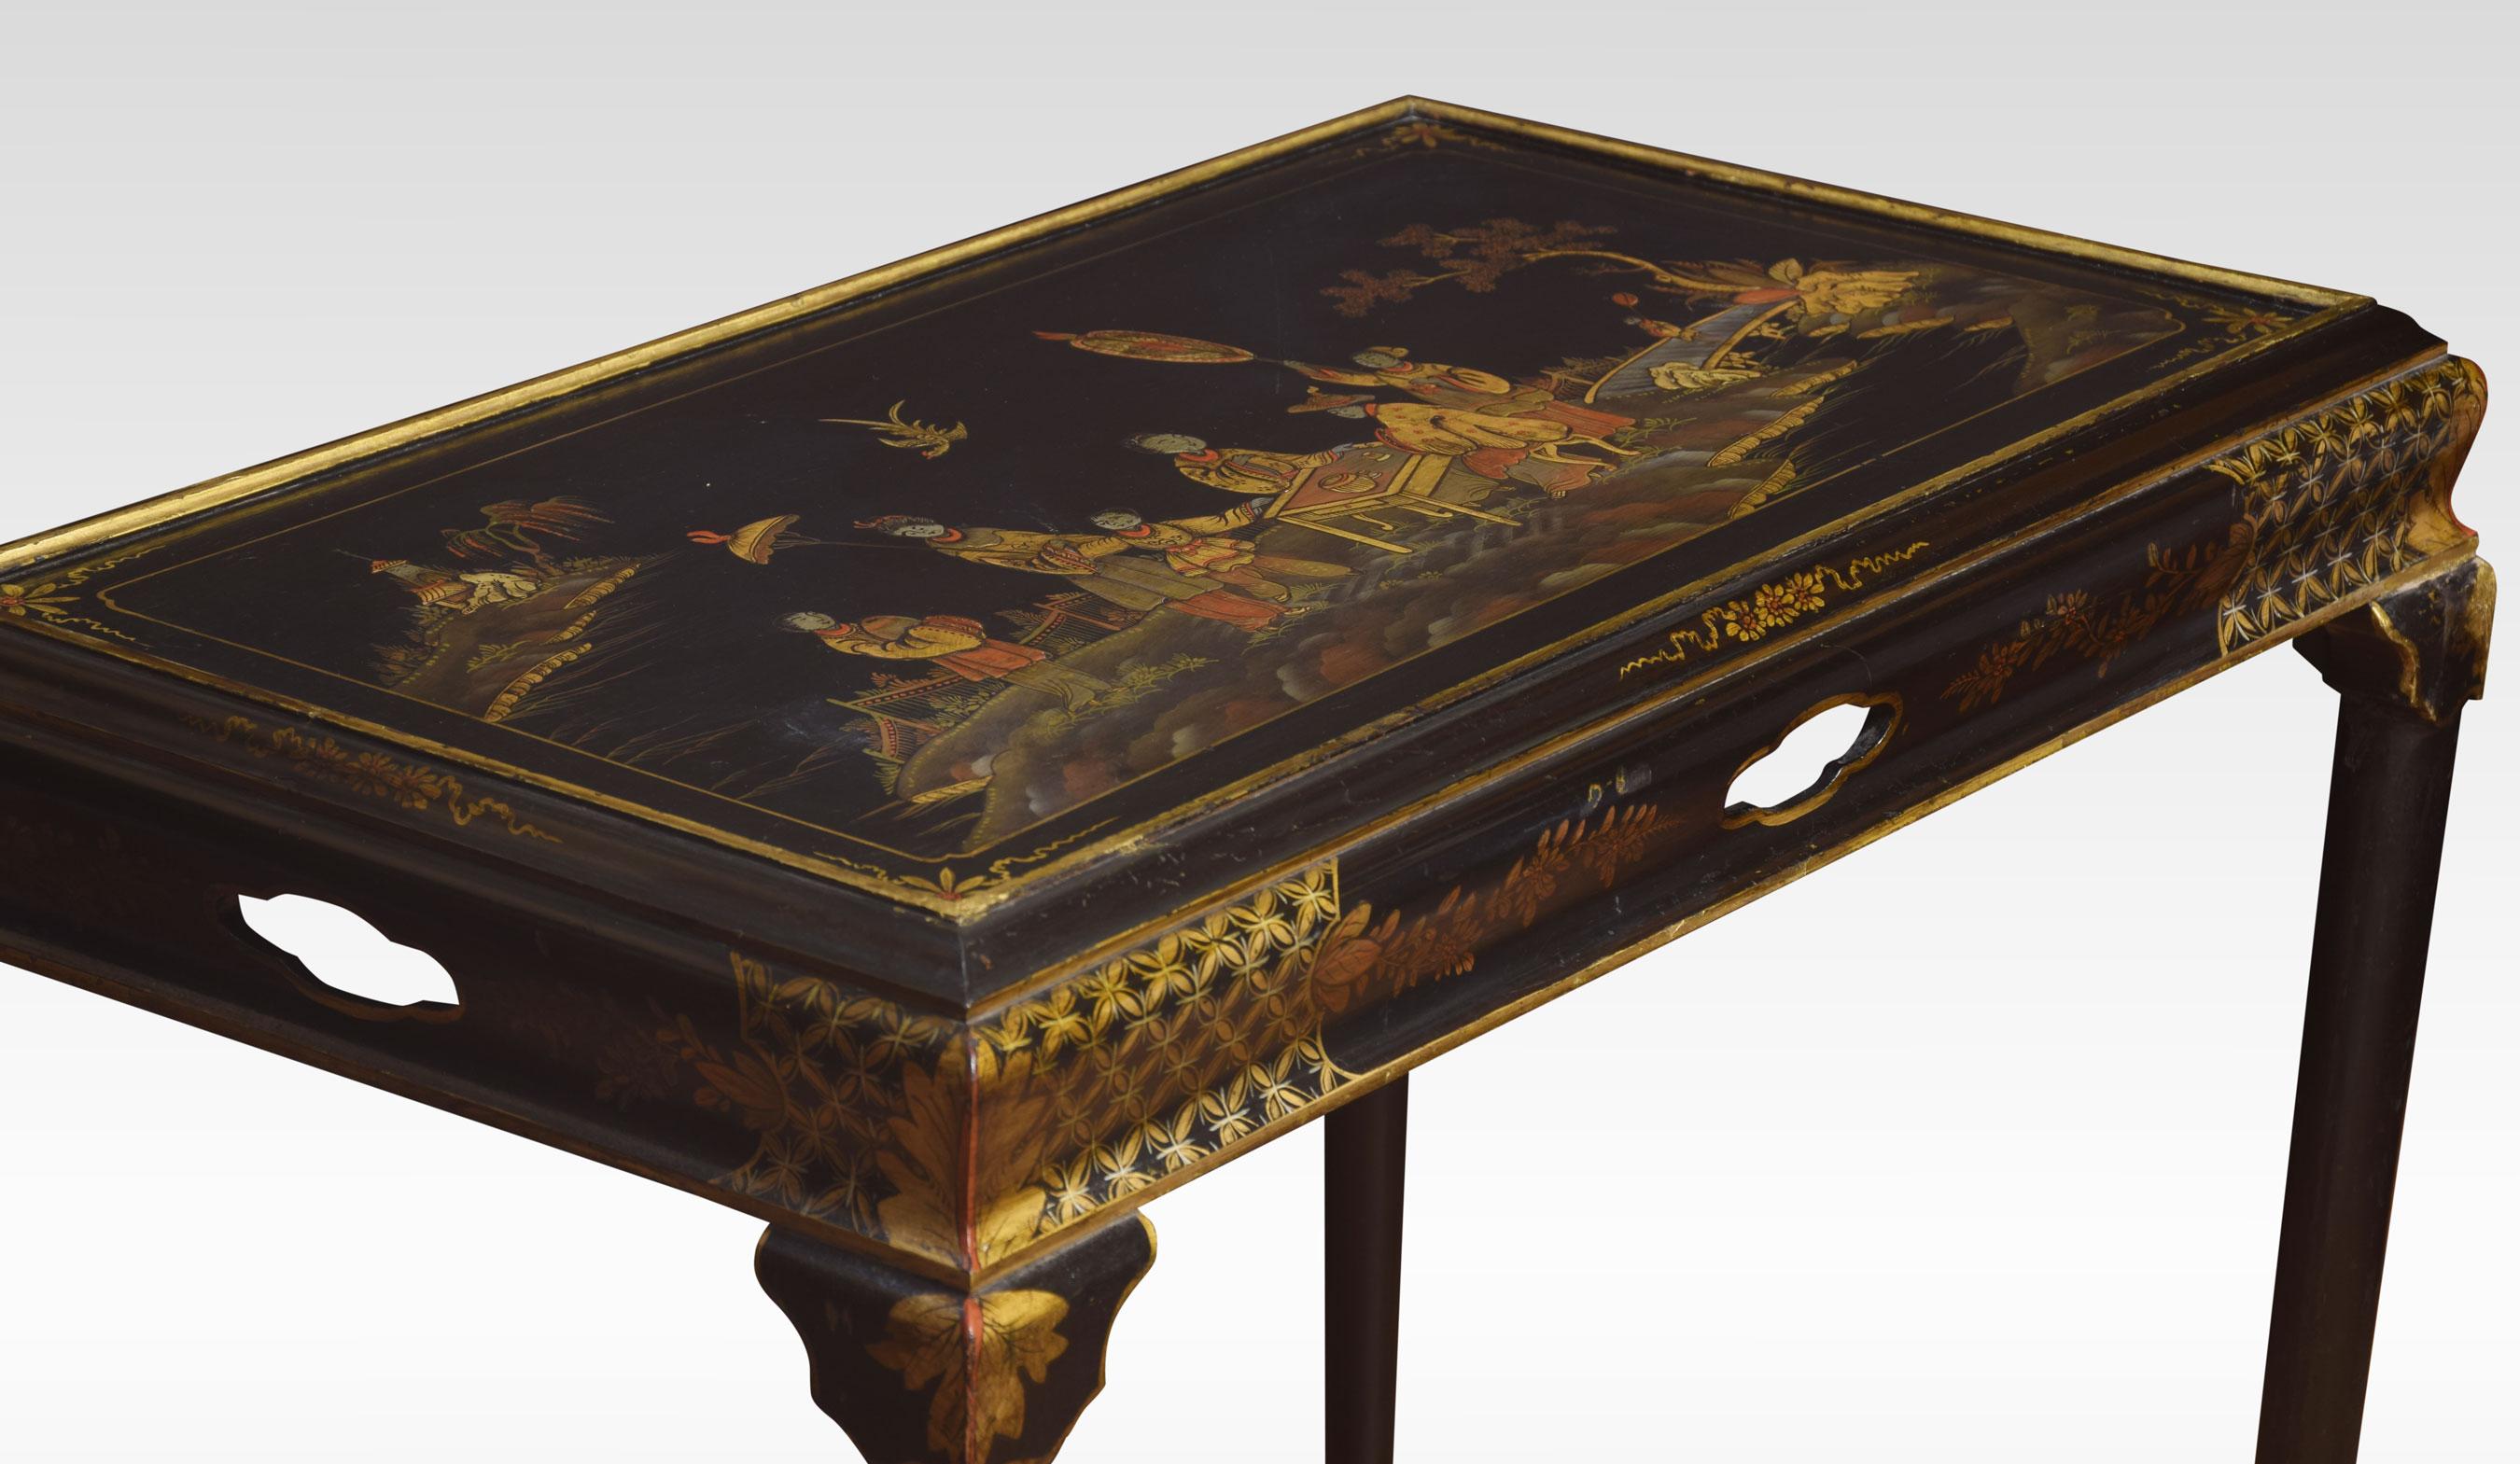 Chinoiserie decorated table the rectangular top with overall gilt decoration depicting figures and landscape. Raised up on four cabriole legs terminating in pad feet.
Dimensions:
Height 30 inches
Width 36 inches
Depth 20.5 inches.